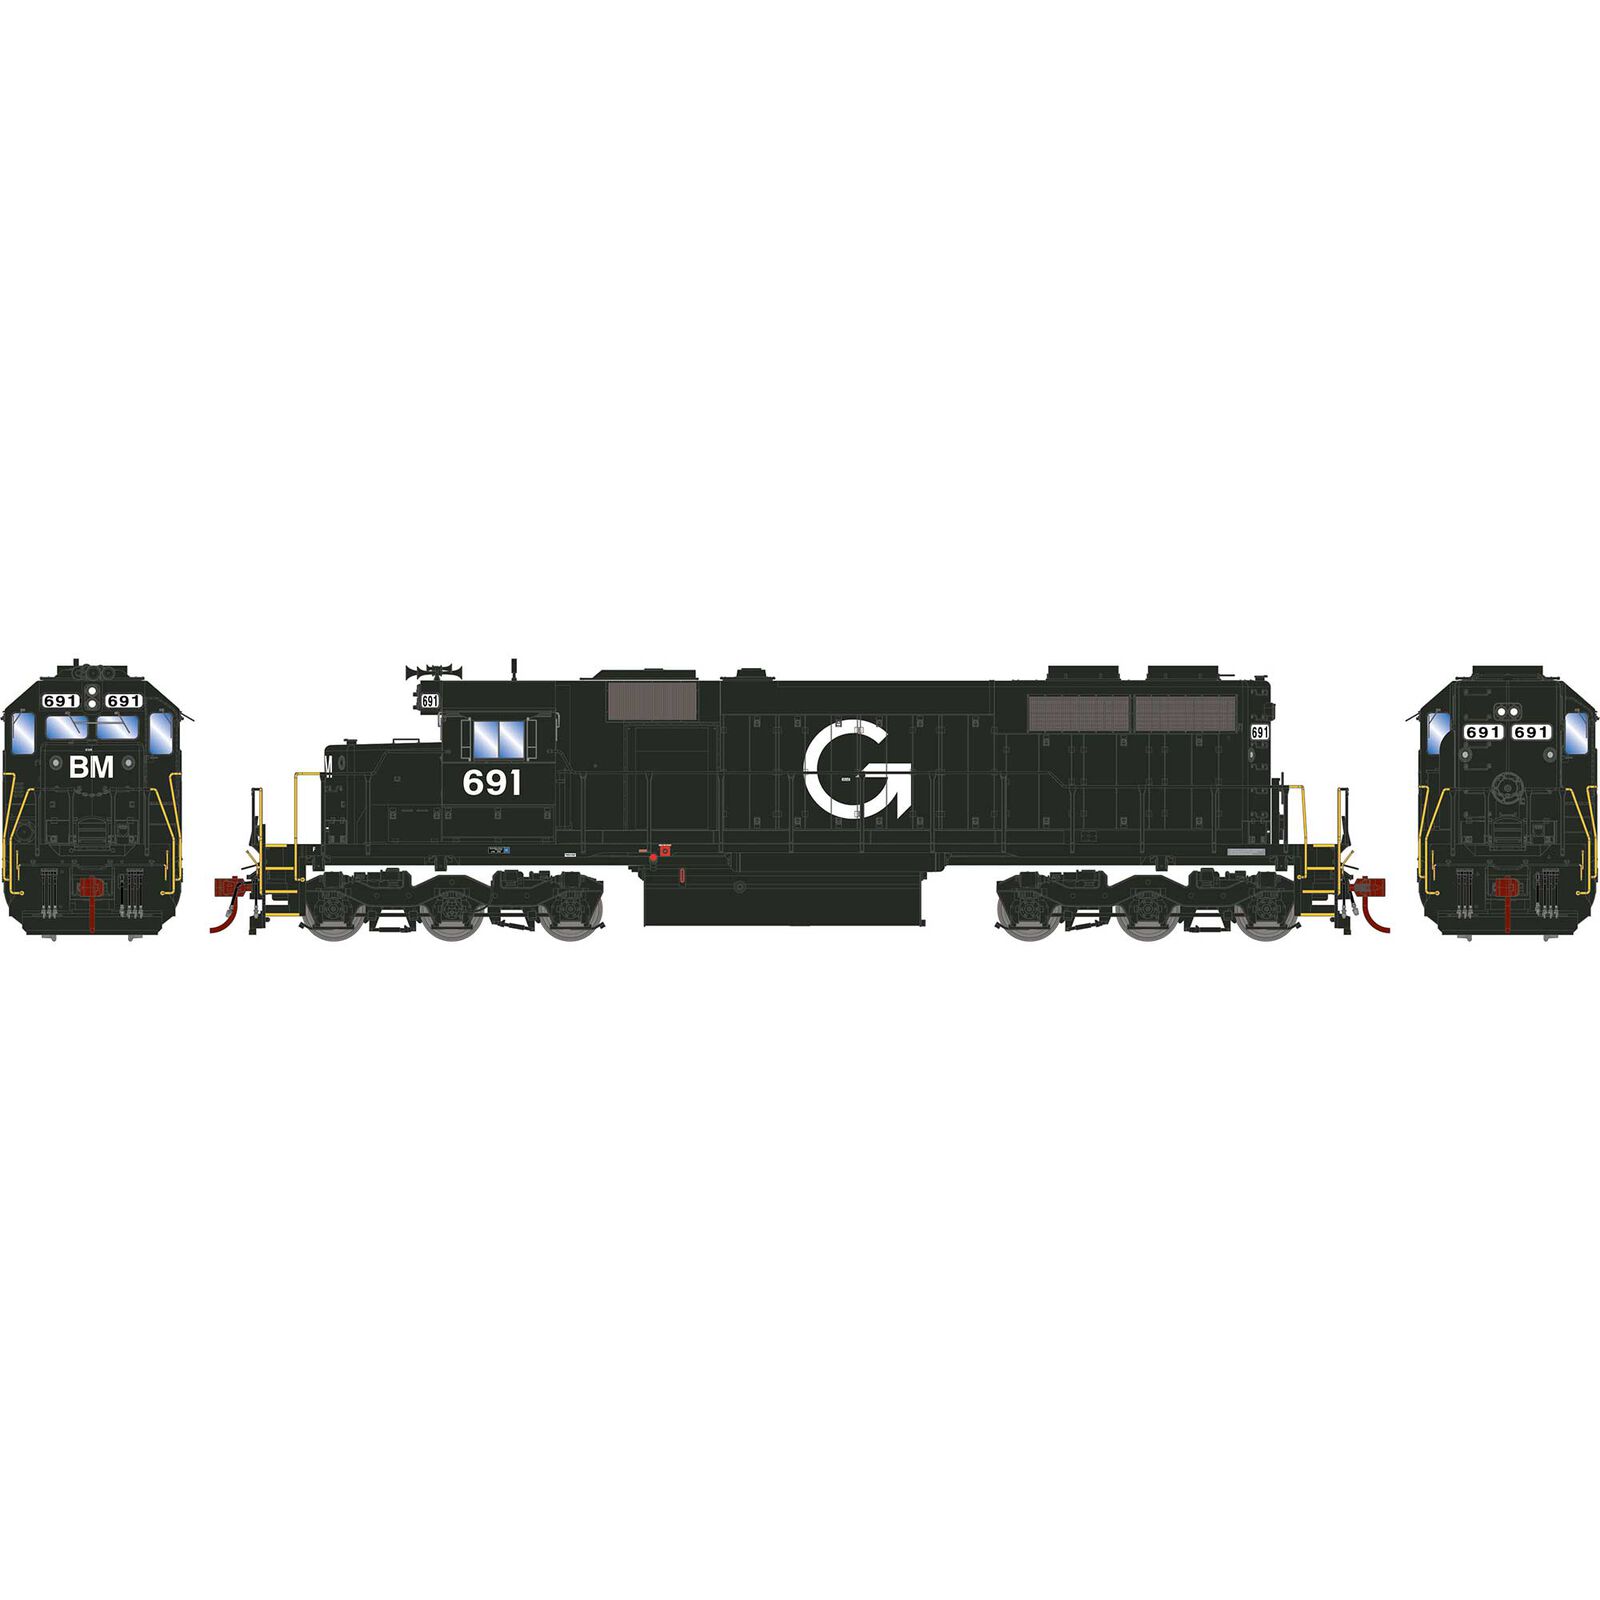 HO RTR SD39 with DCC & Sound, B&M #691